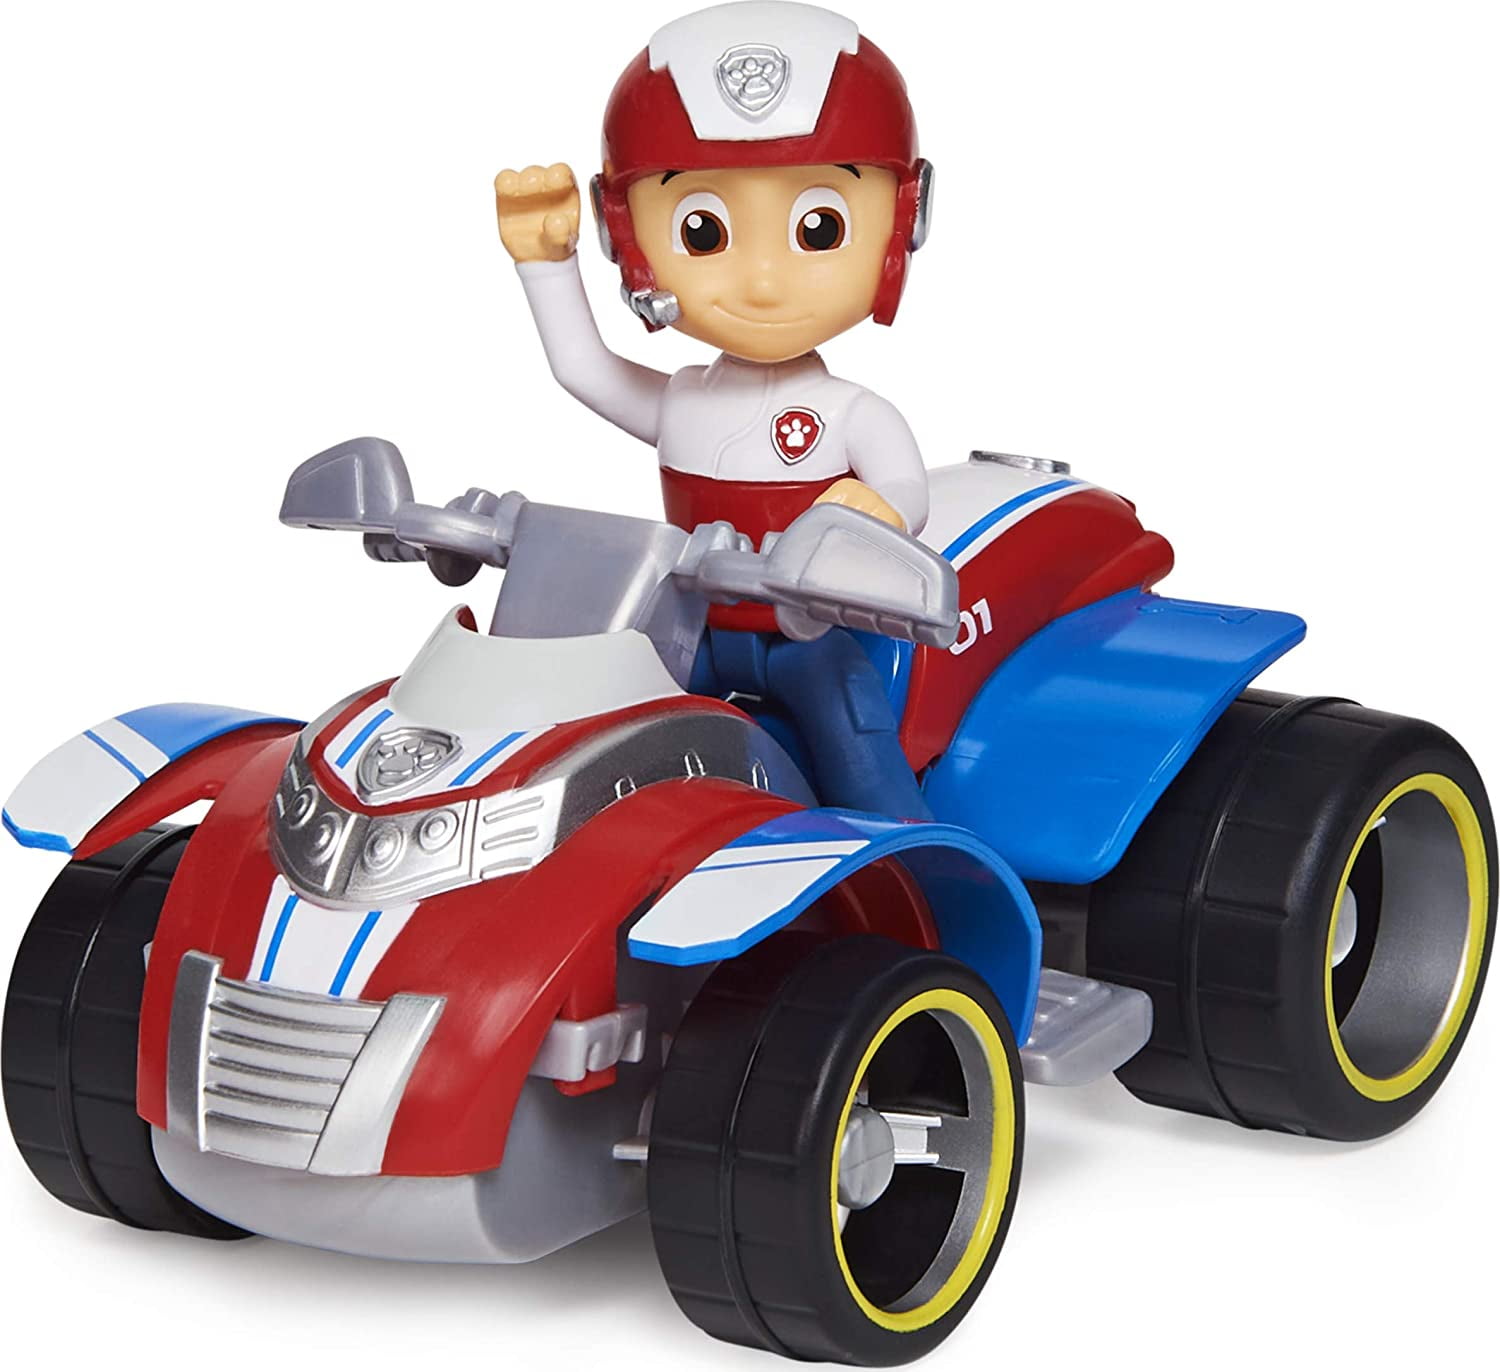 Paw Patrol Vehicle And Figure Ryder Rescue Atv